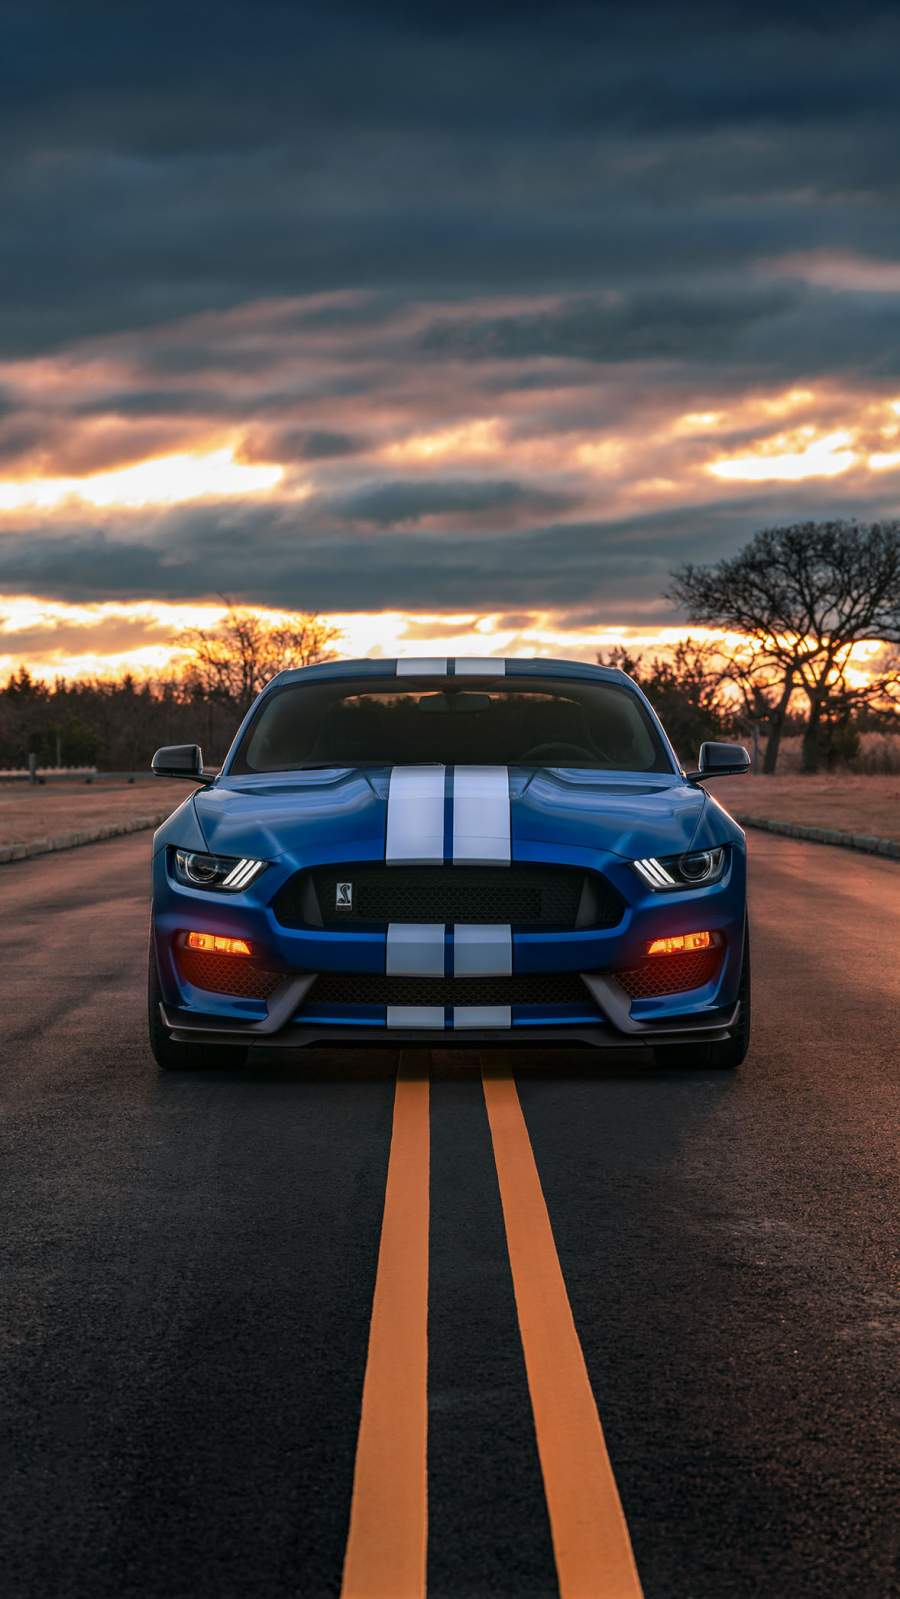 Ford Mustang IPhone Wallpaper - IPhone Wallpapers : iPhone Wallpapers